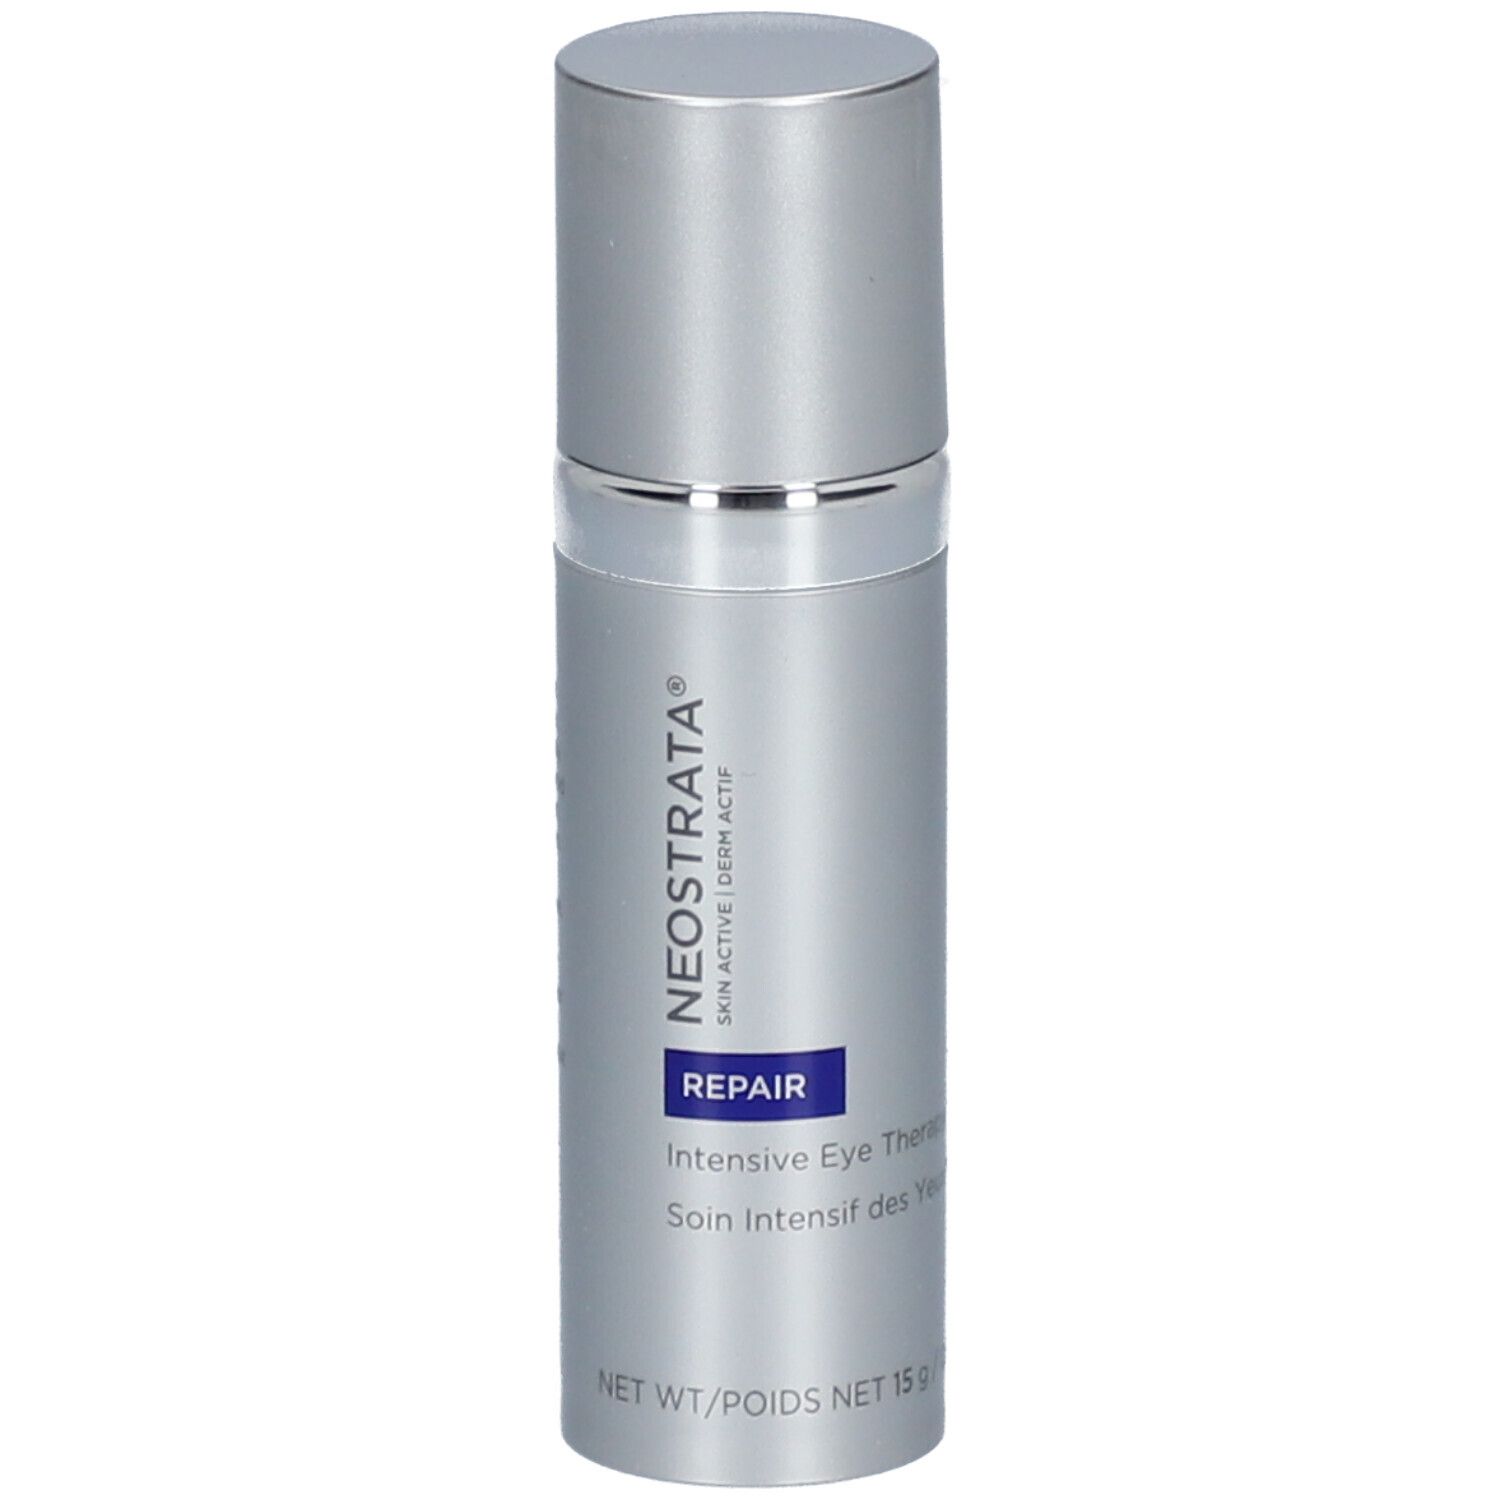 NeoStrata® SKIN ACTIVE Intensive Eye Therapy